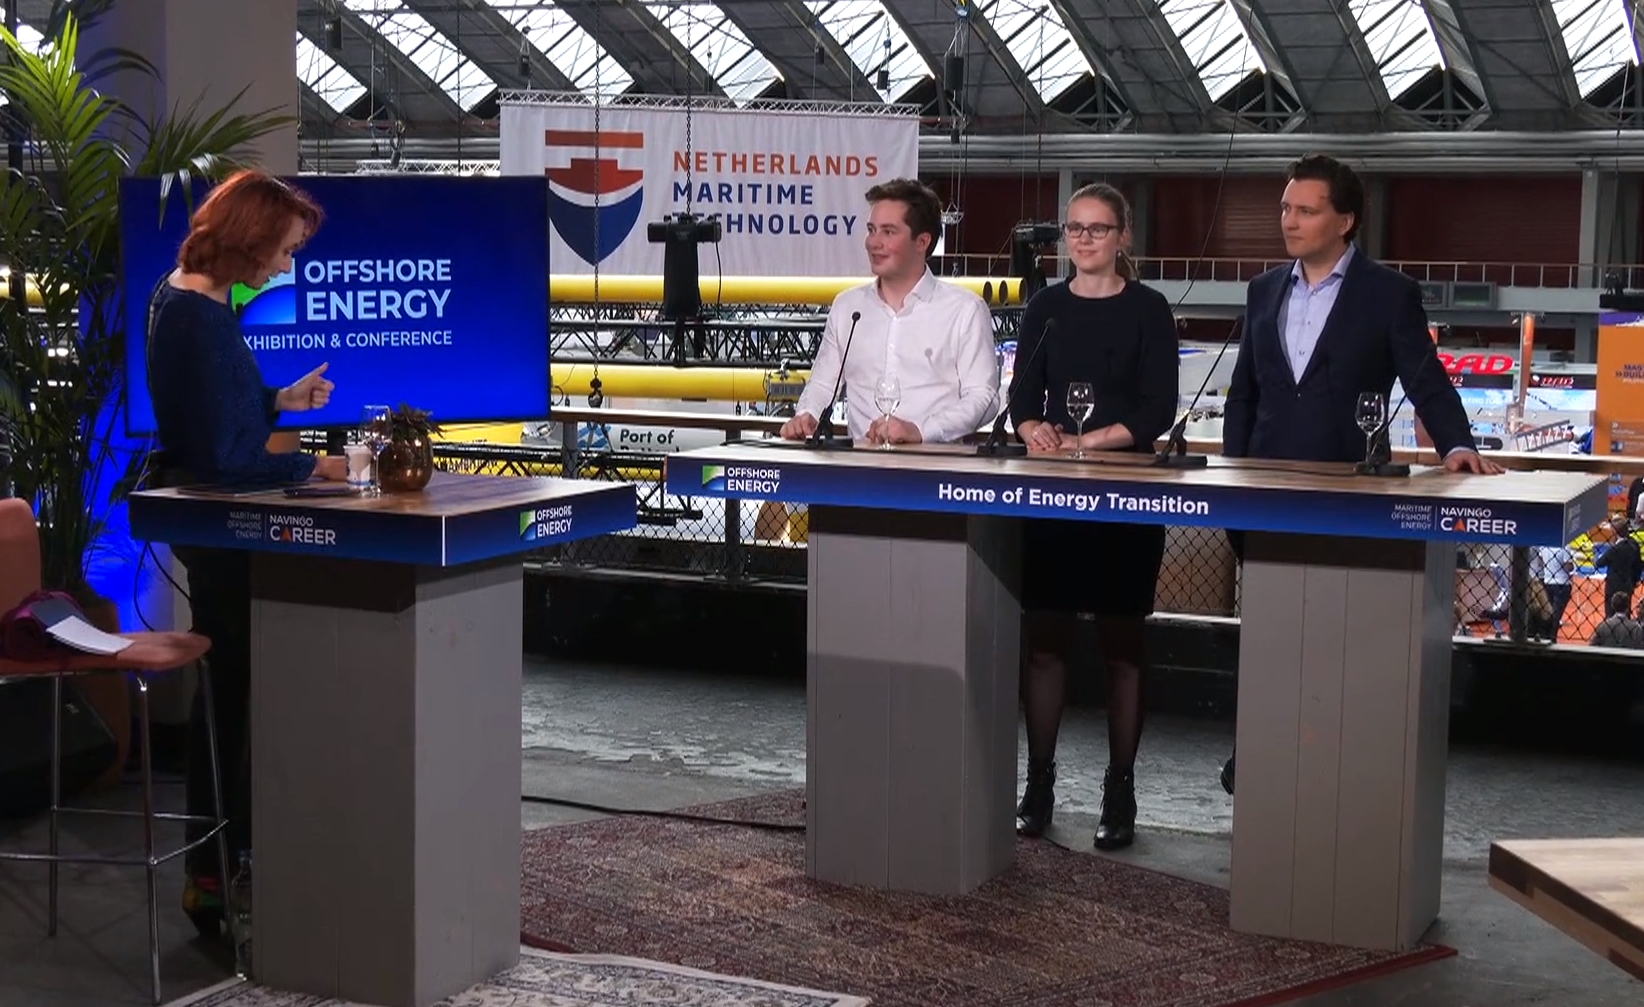 Young professionals and students share their perspective on offshore energy (Screenshot/Video by Navingo)